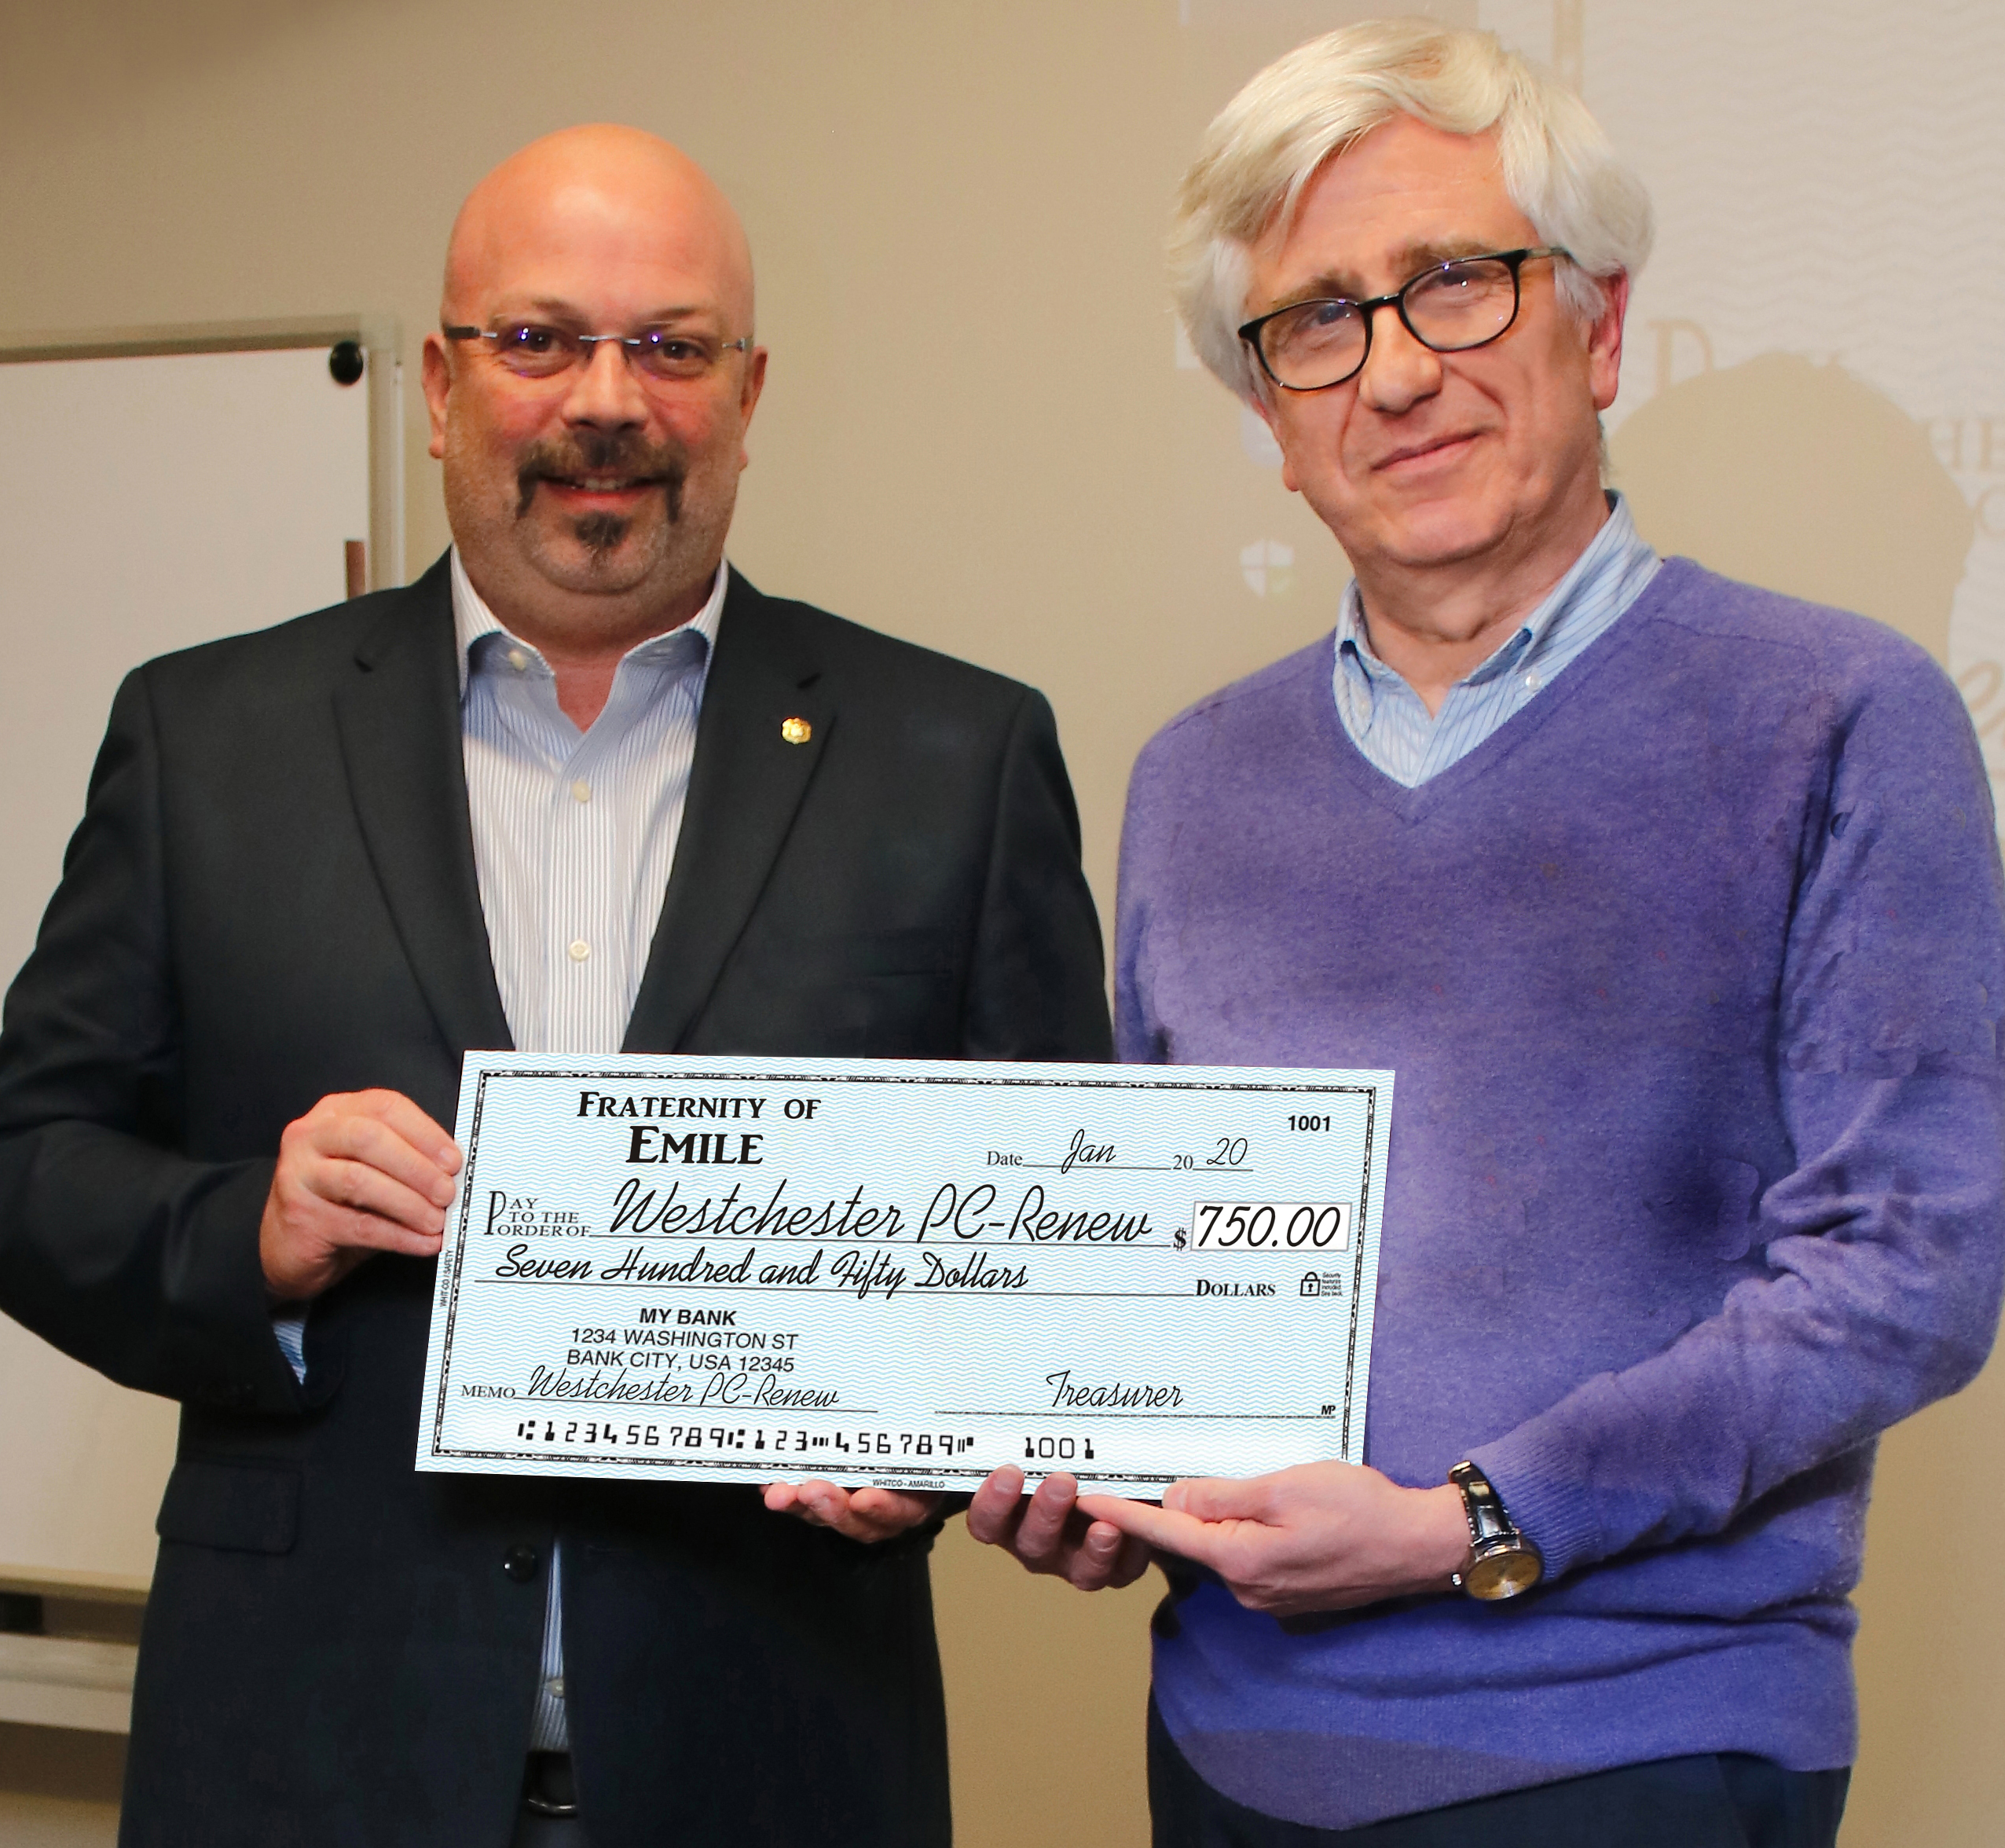 Fraternity of Emile makes a donation